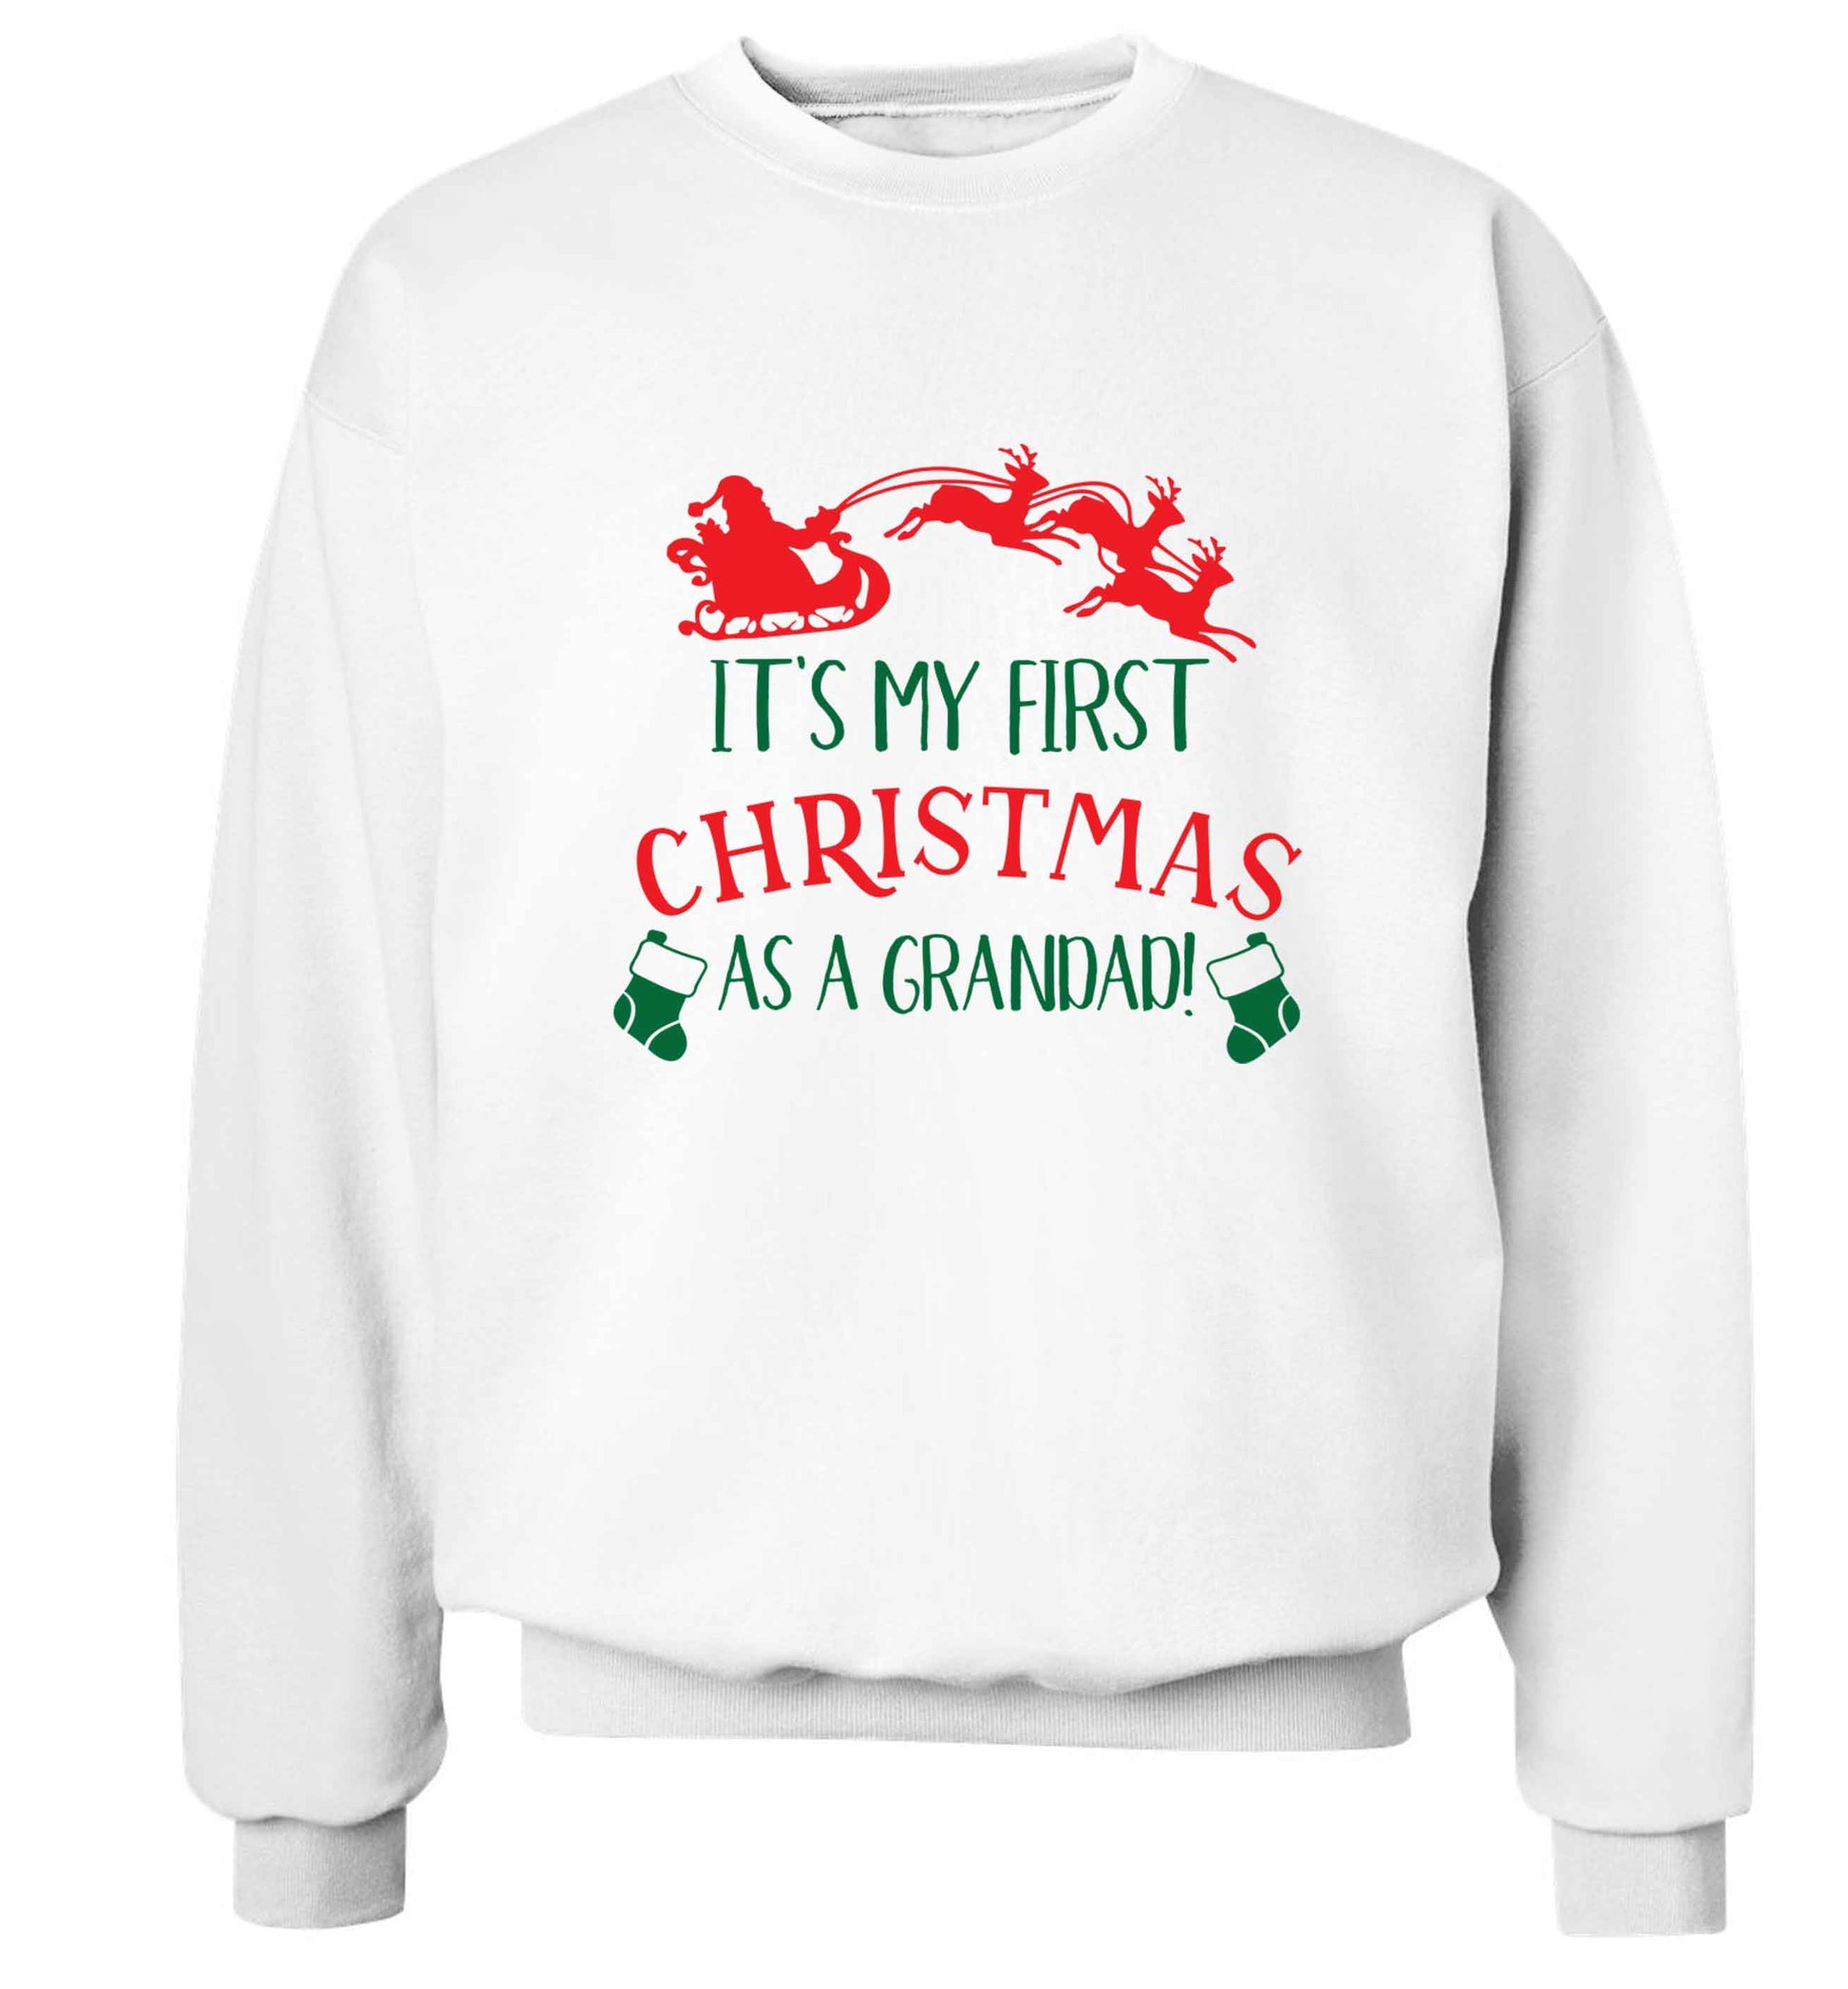 It's my first Christmas as a grandad! Adult's unisex white Sweater 2XL